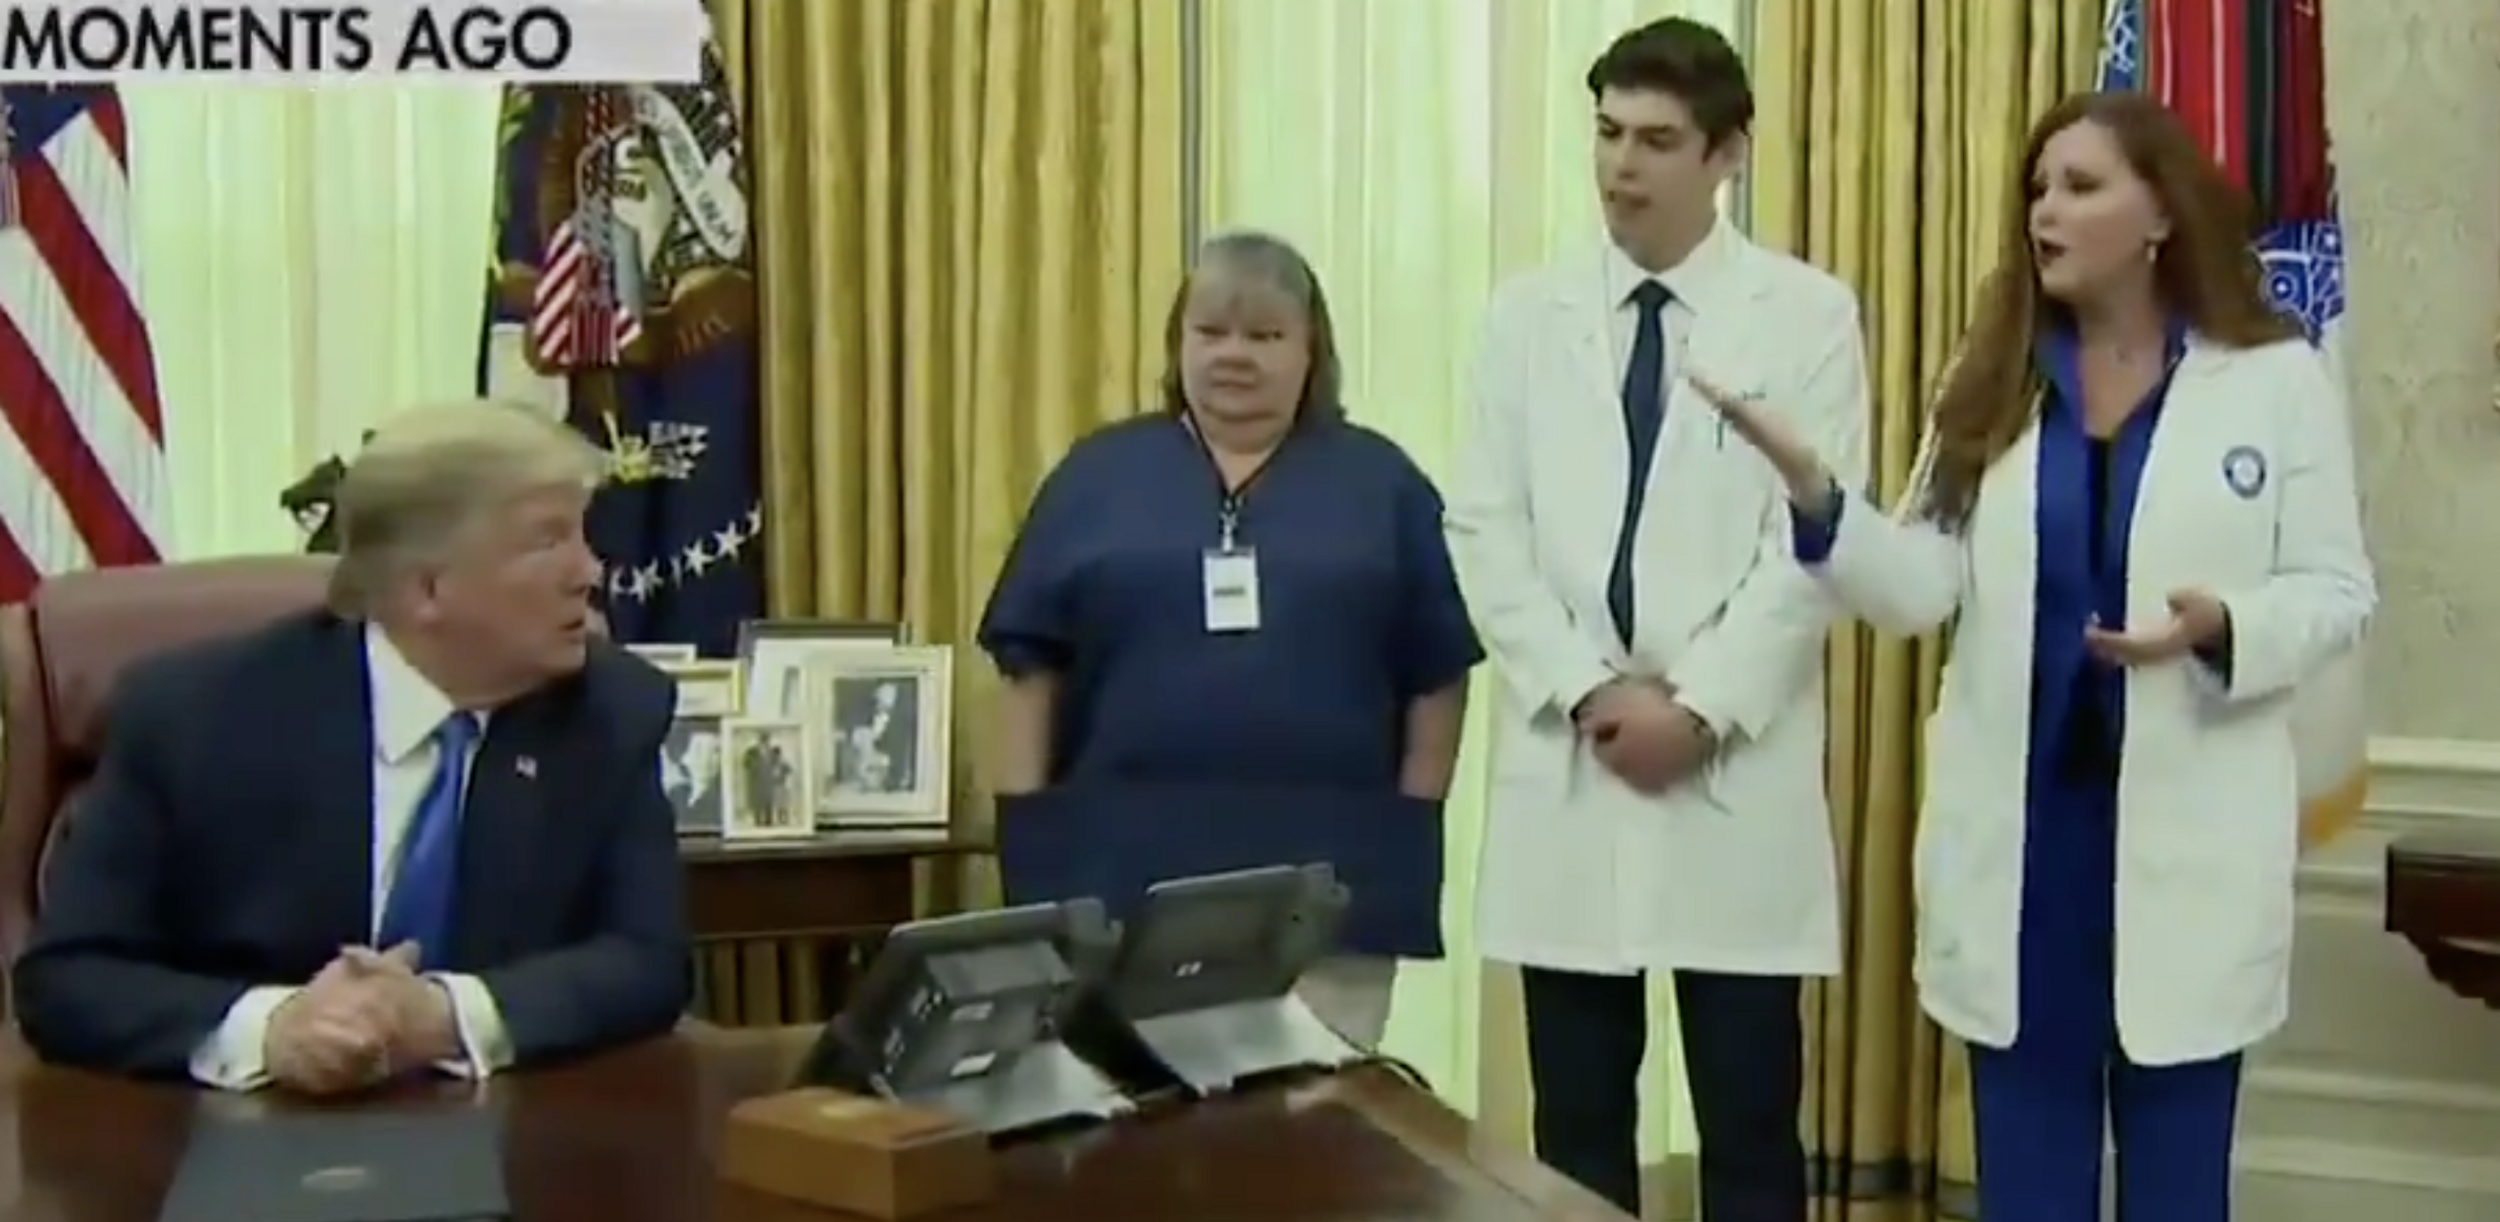 Trump Contradicts Nurse's Claim That Protective Equipment Has Been 'Sporadic' During Nurse Appreciation Event